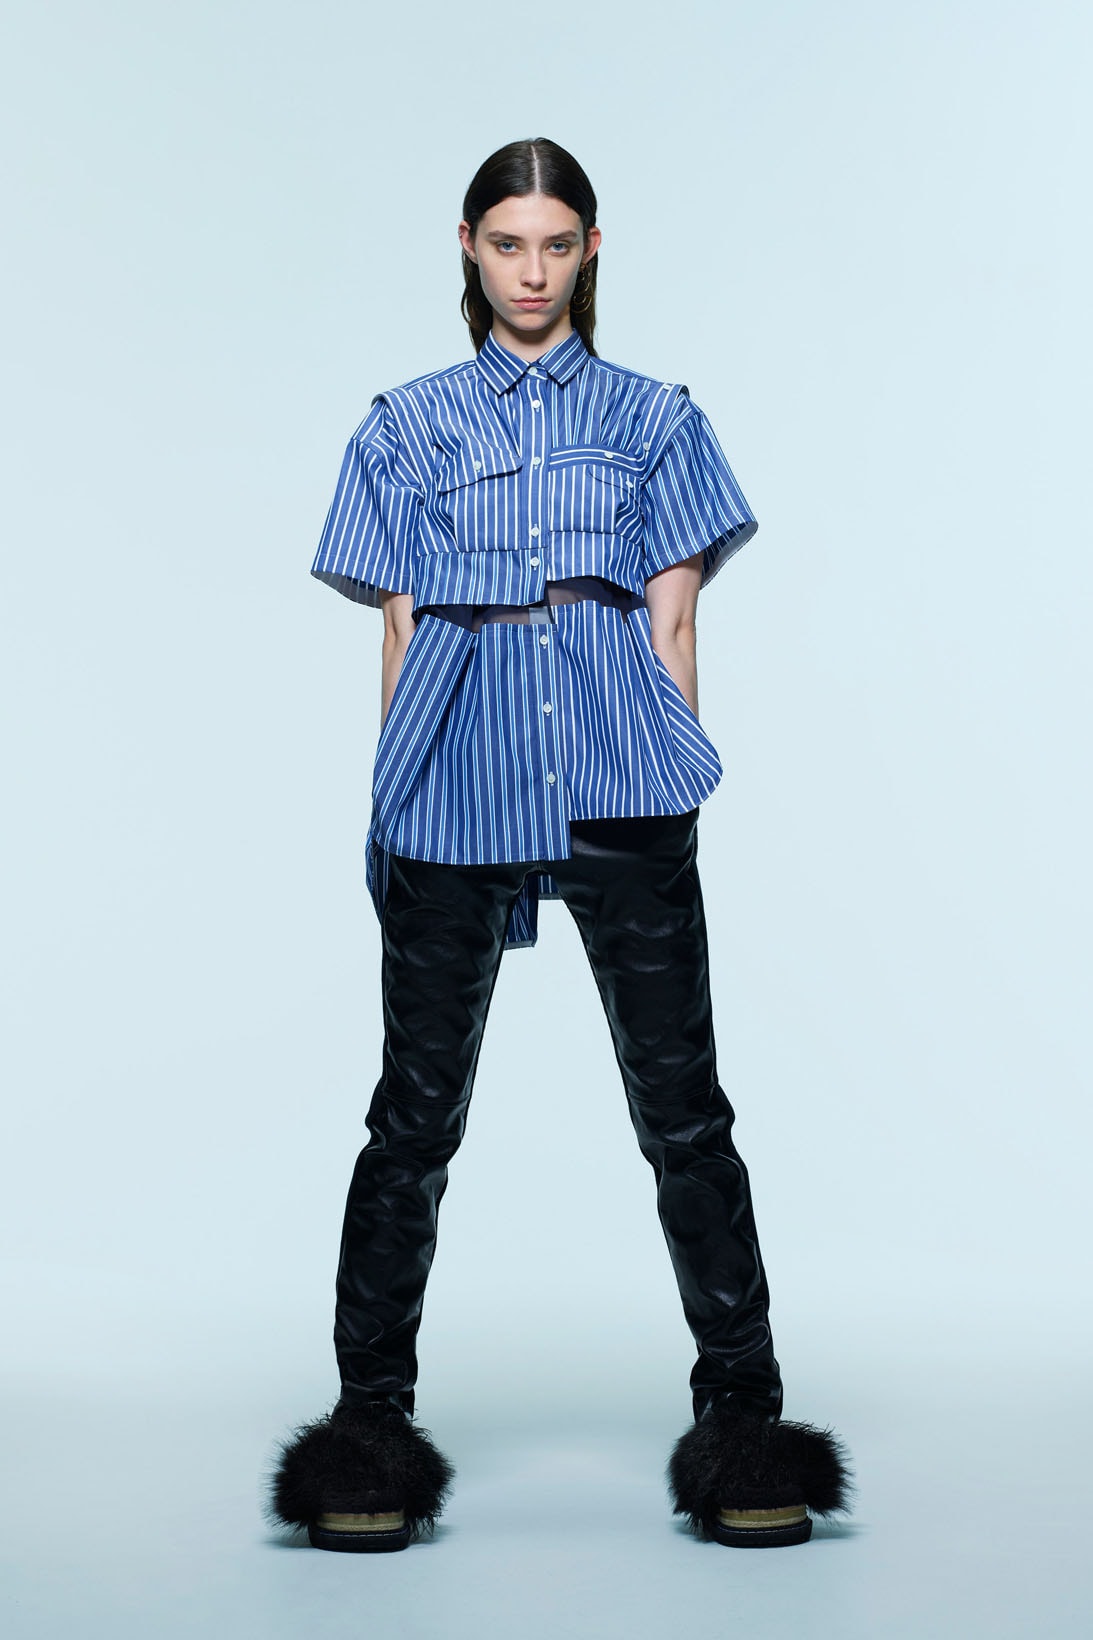 sacai Pre-Fall Womenswear Collection Chitose Abe Madsaki Collaboration Images